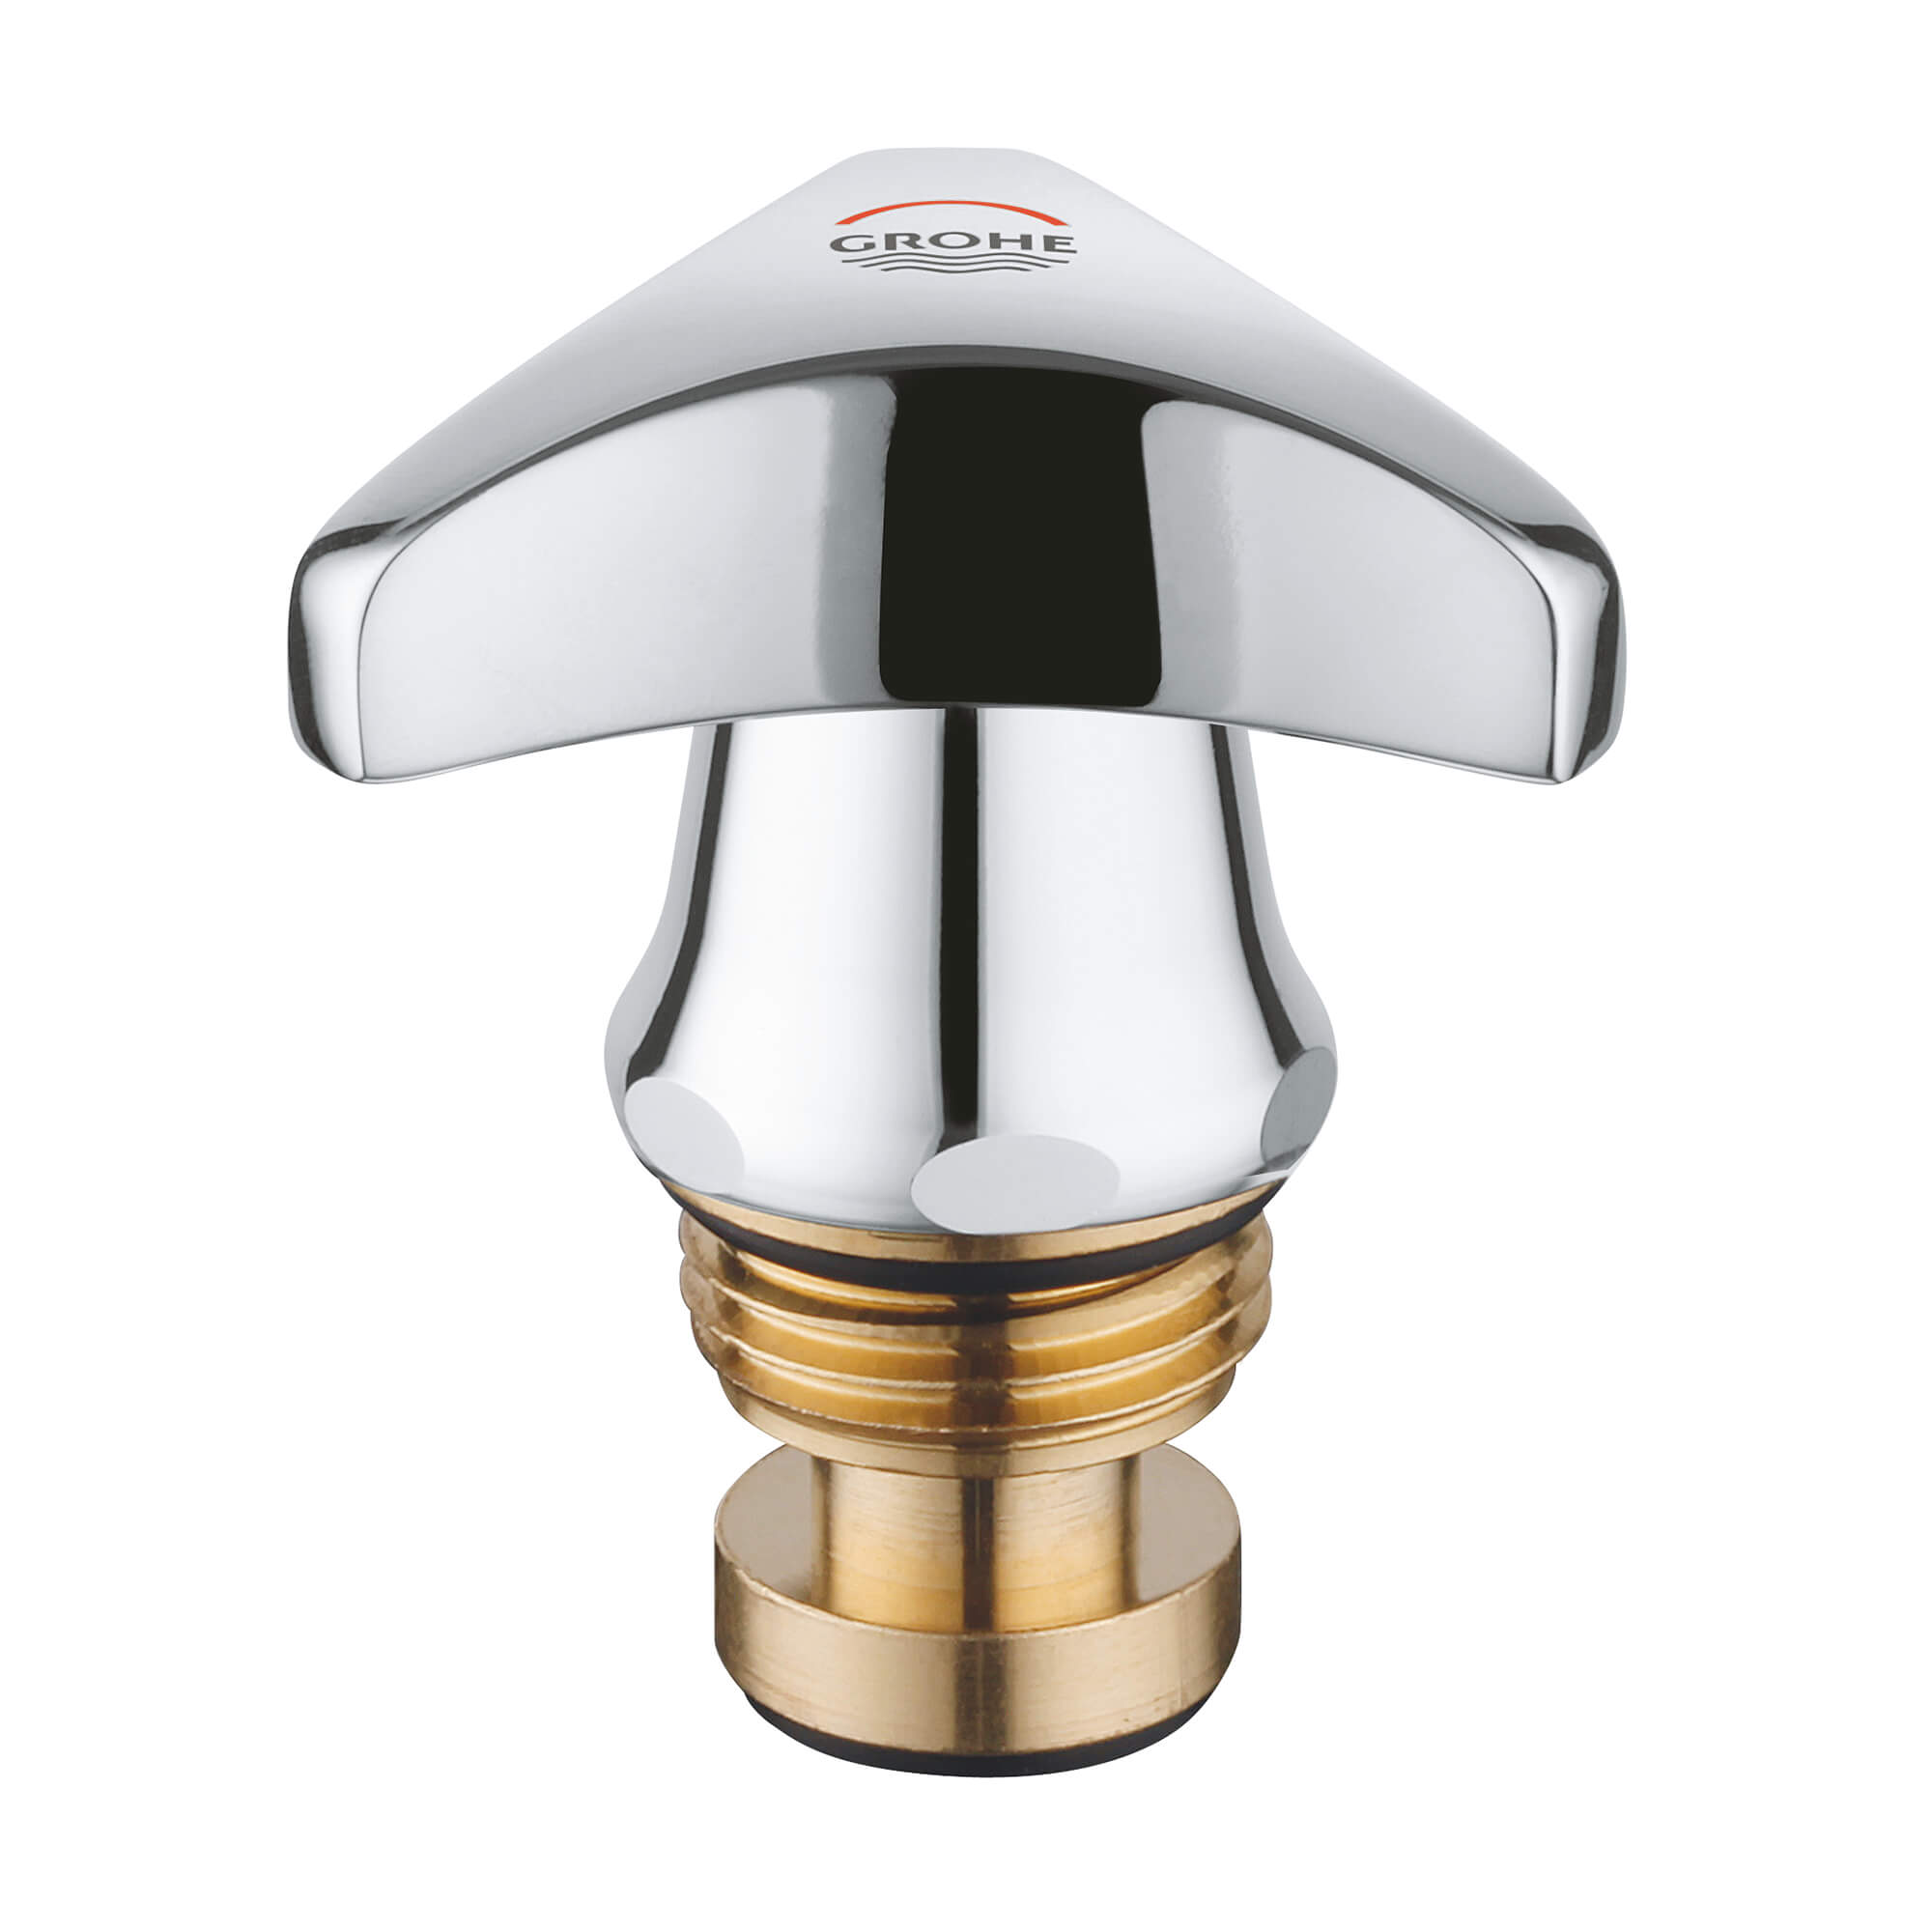 Headpart Red GROHE CHROME